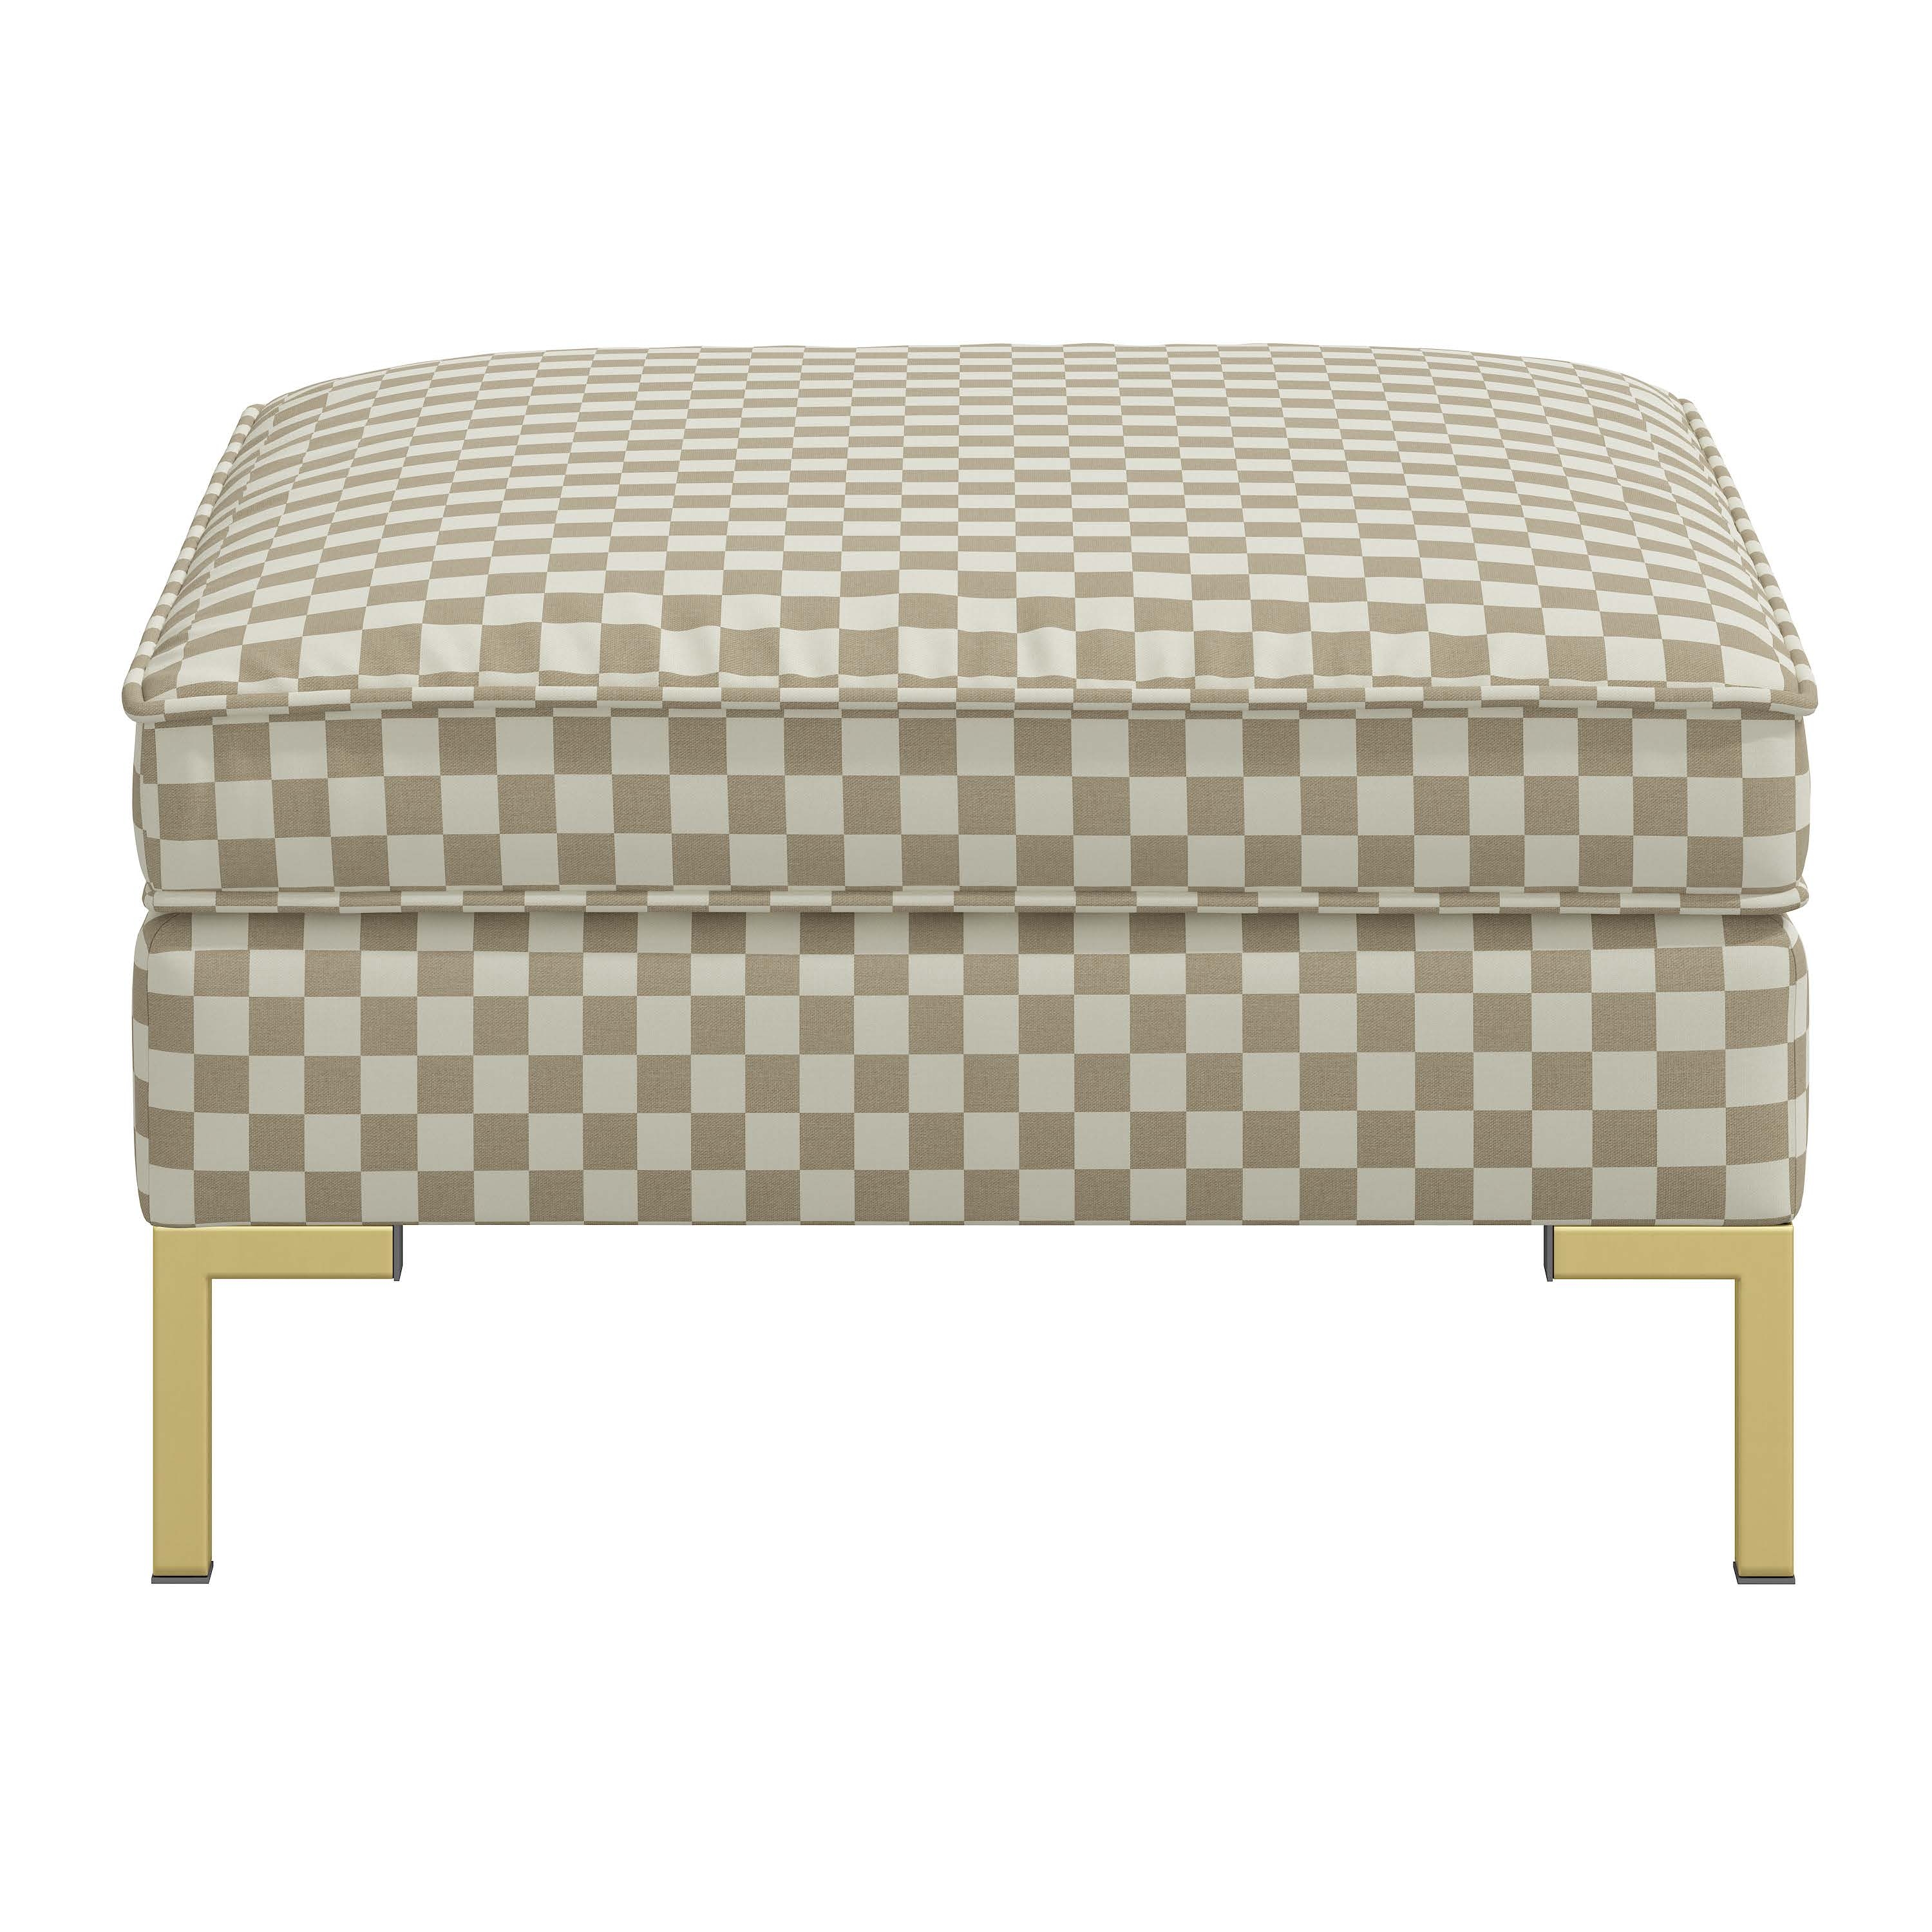 Elle Ottoman - Checked Out - Image 1